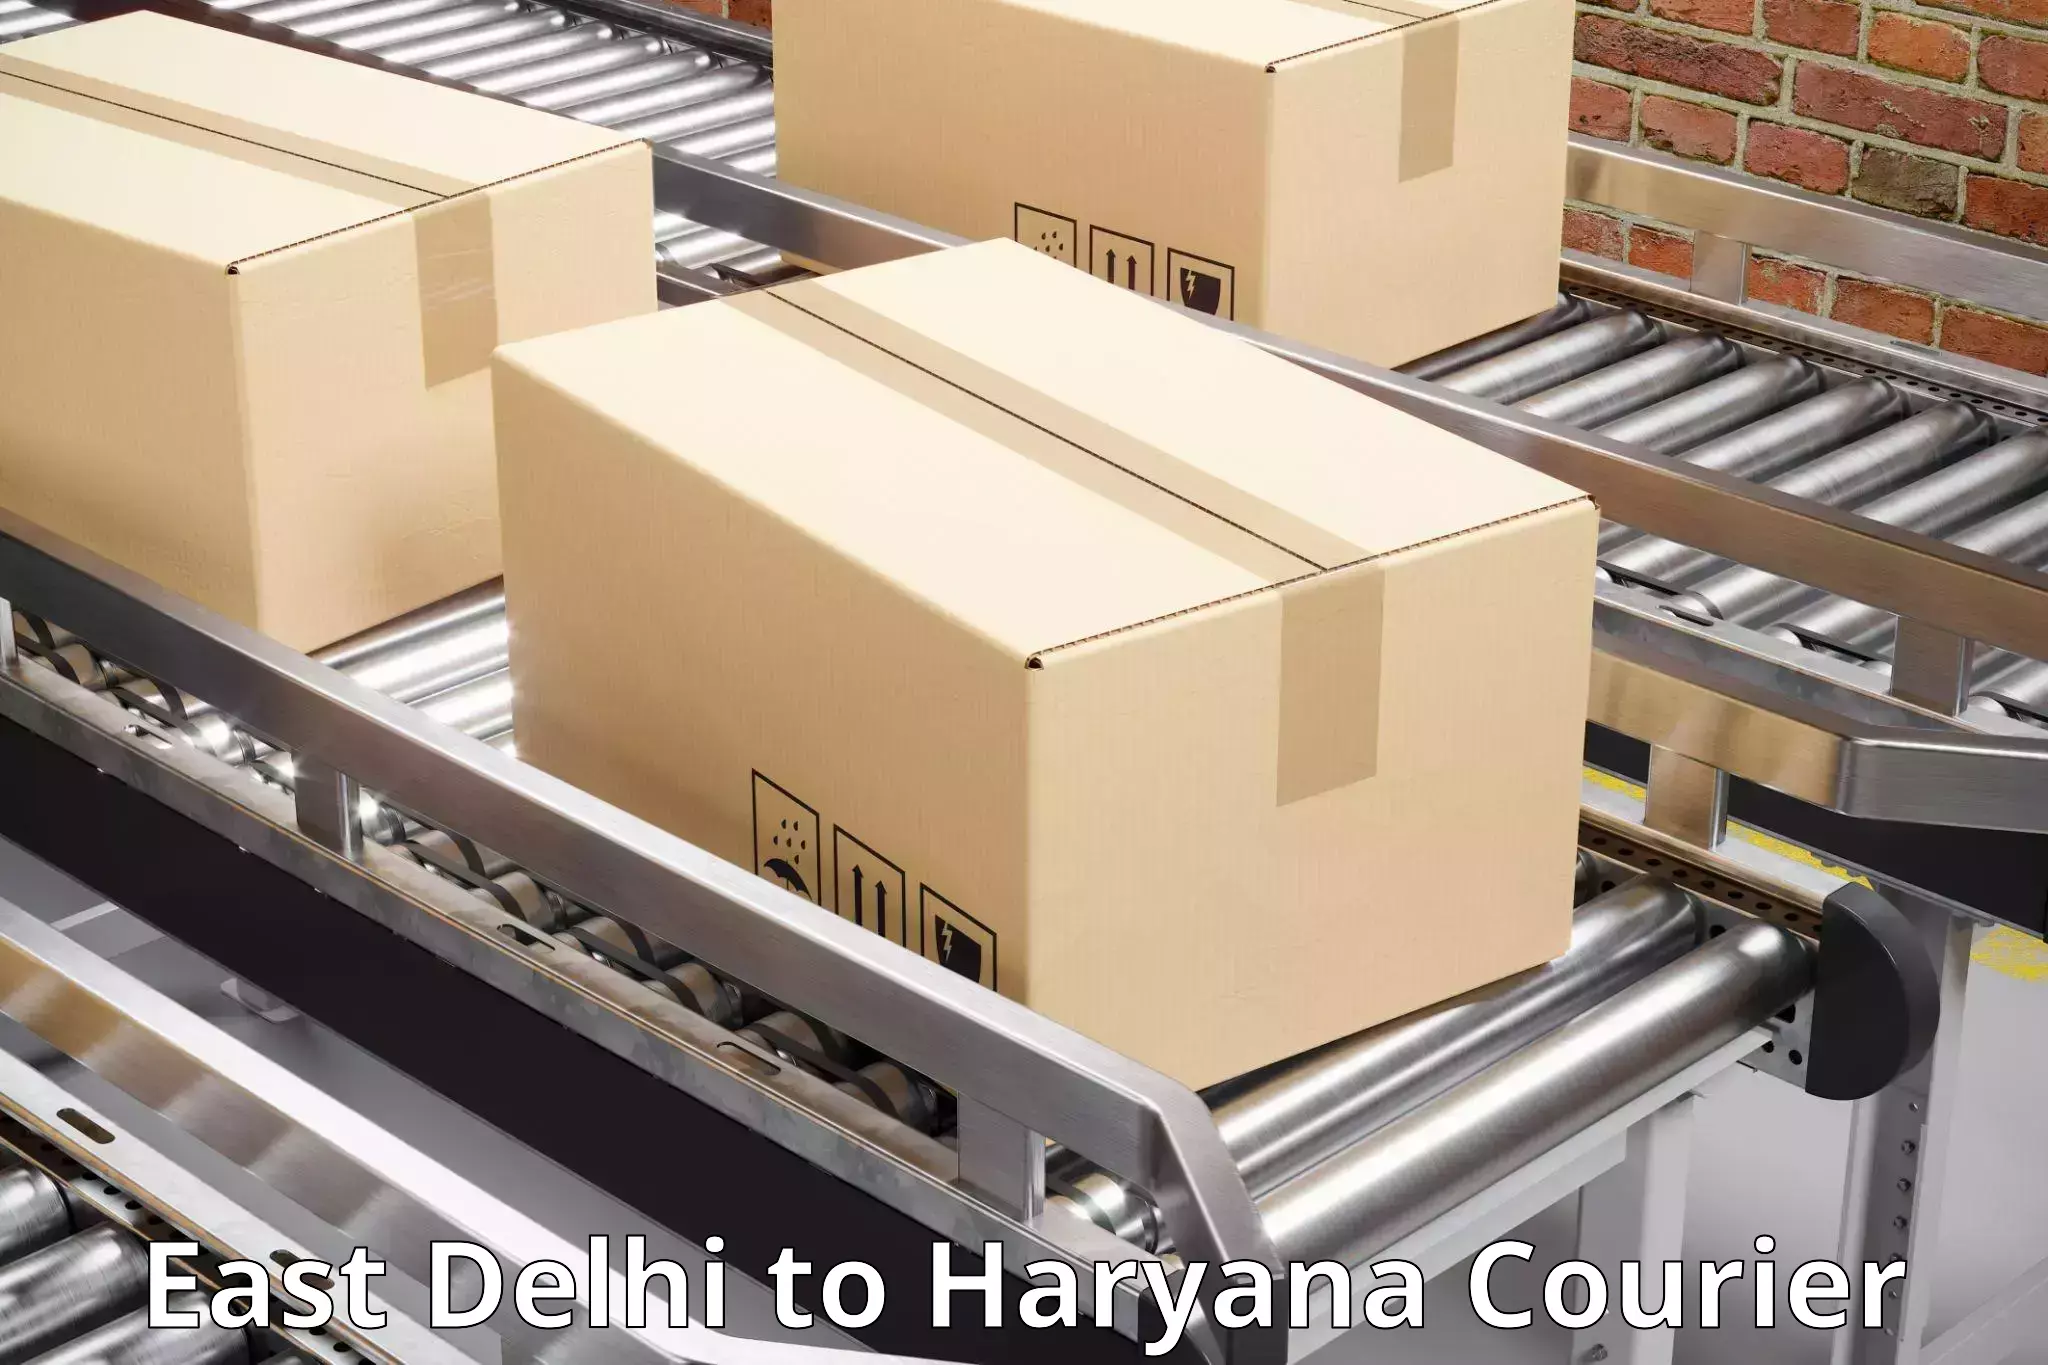 Secure freight services East Delhi to Chaudhary Charan Singh Haryana Agricultural University Hisar